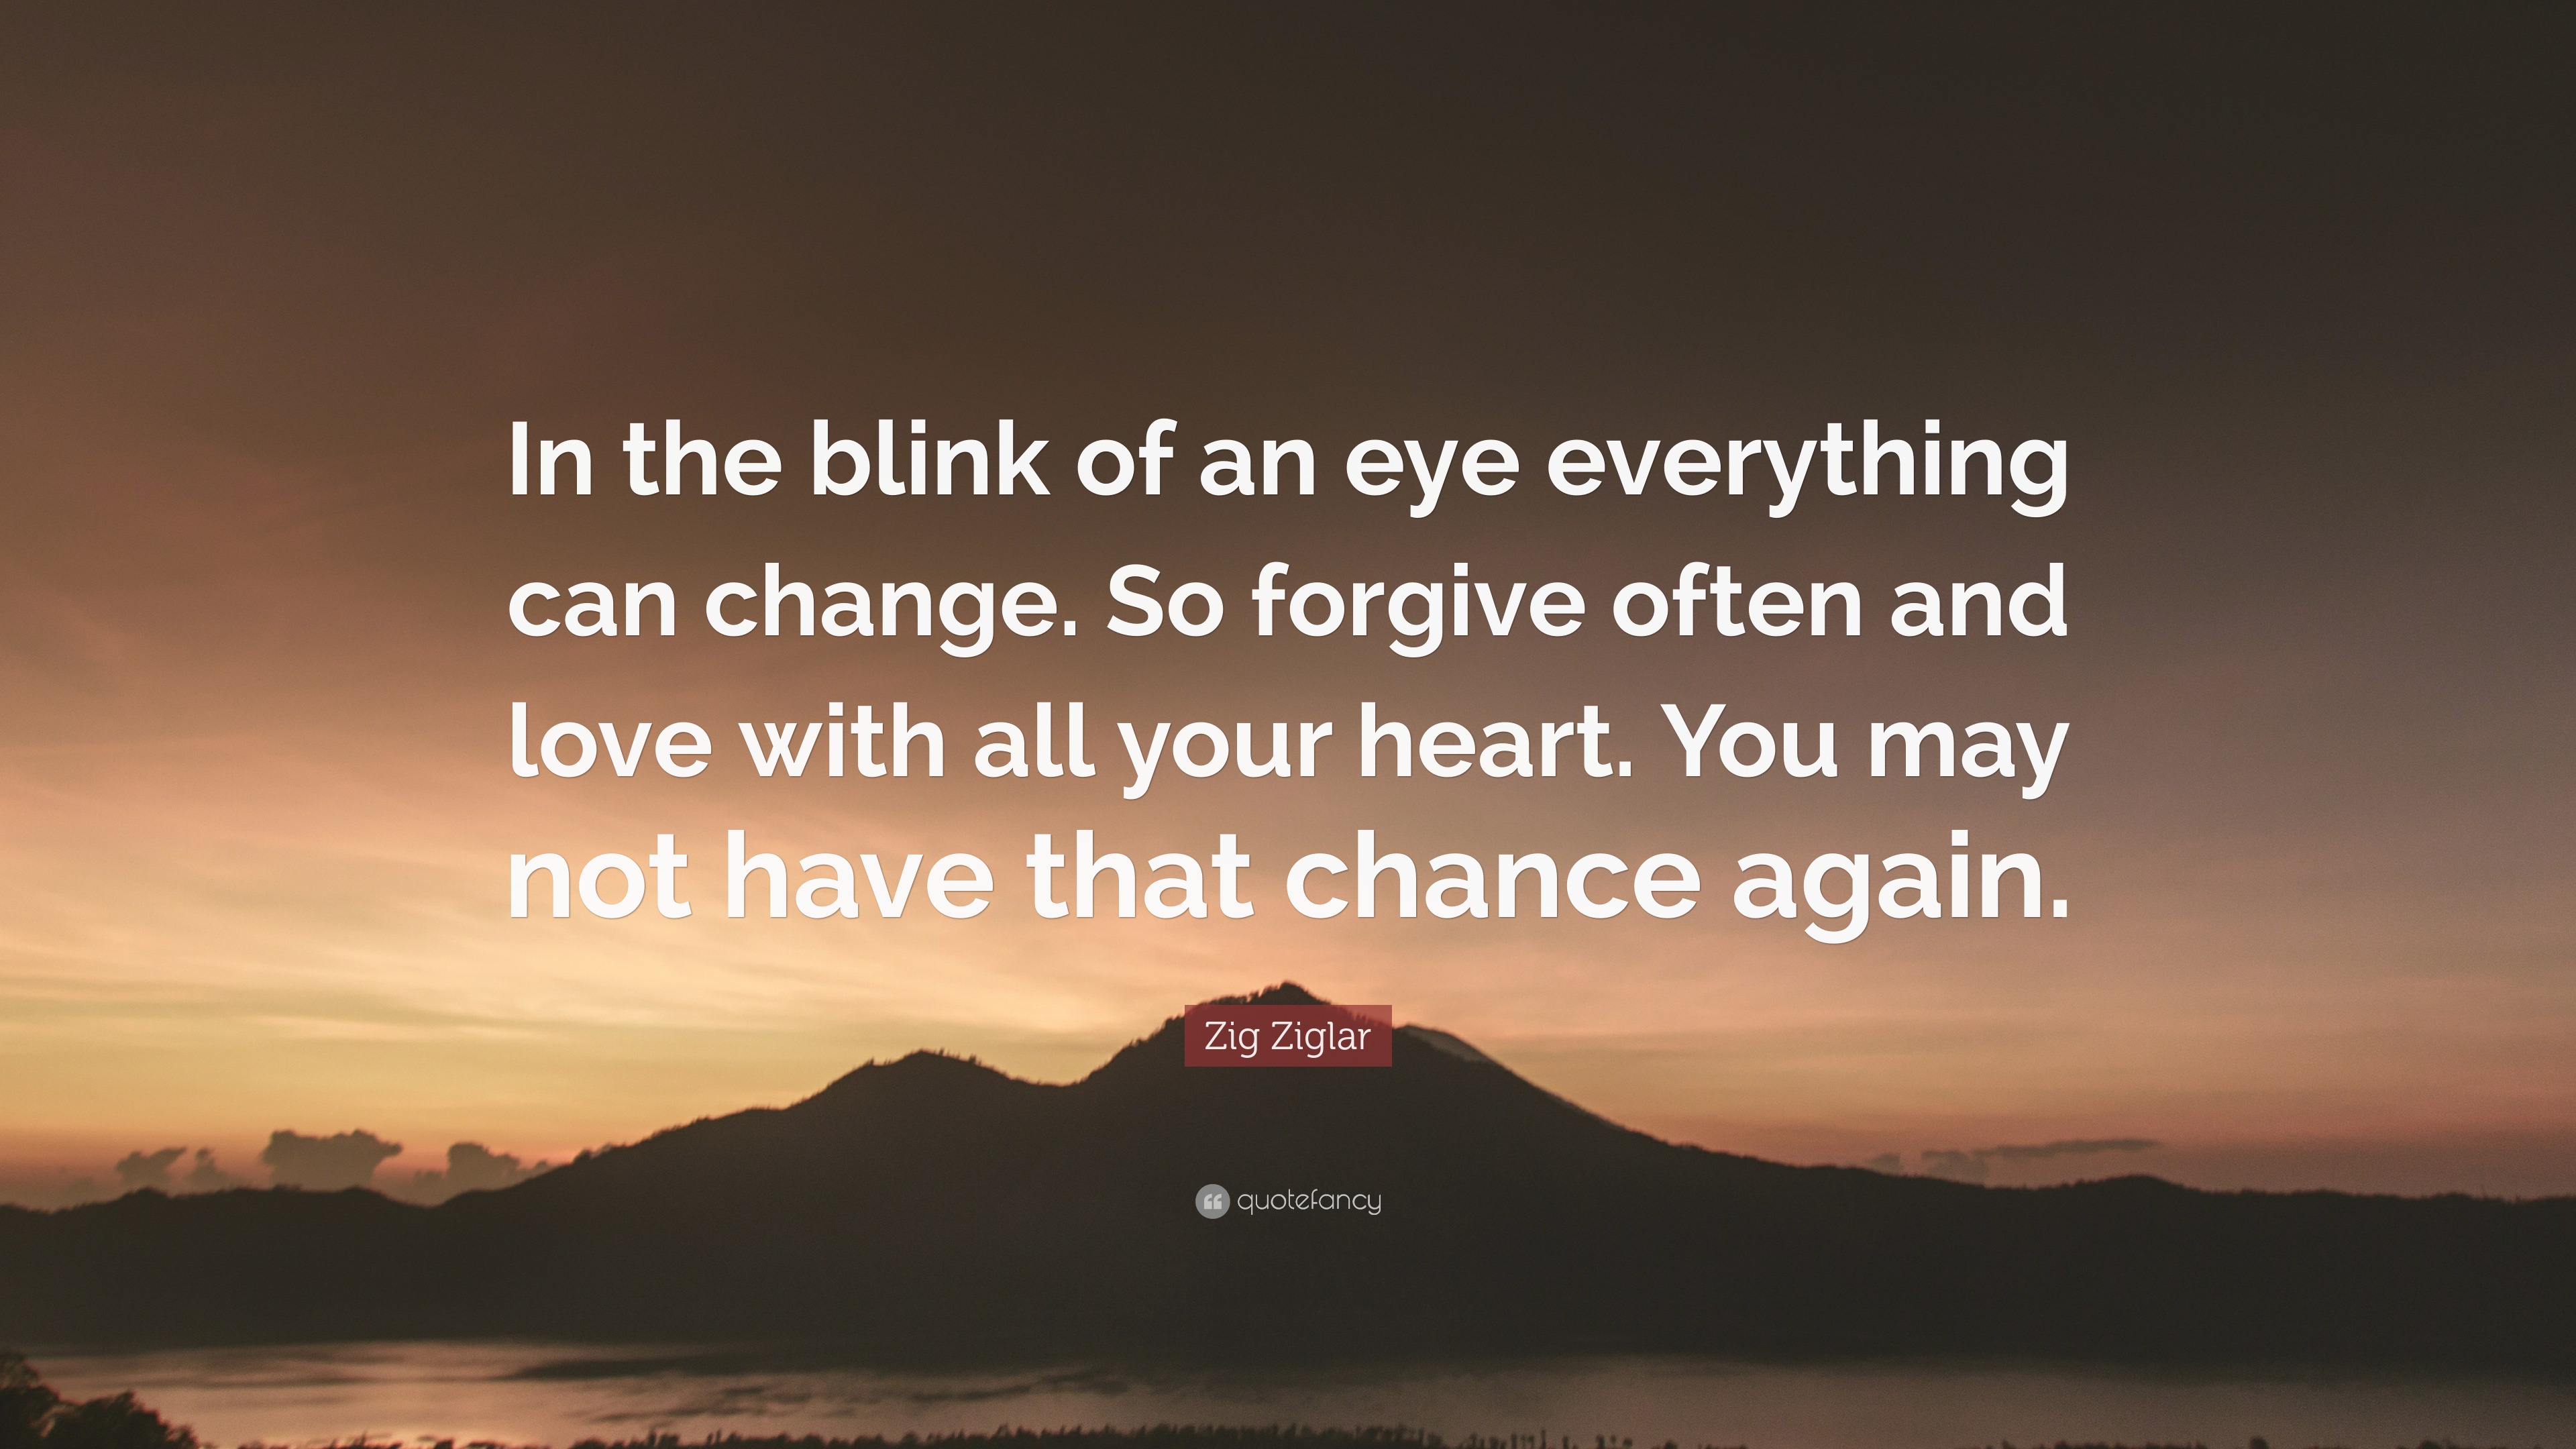 Zig Ziglar Quote: “In the blink of an eye everything can change. So